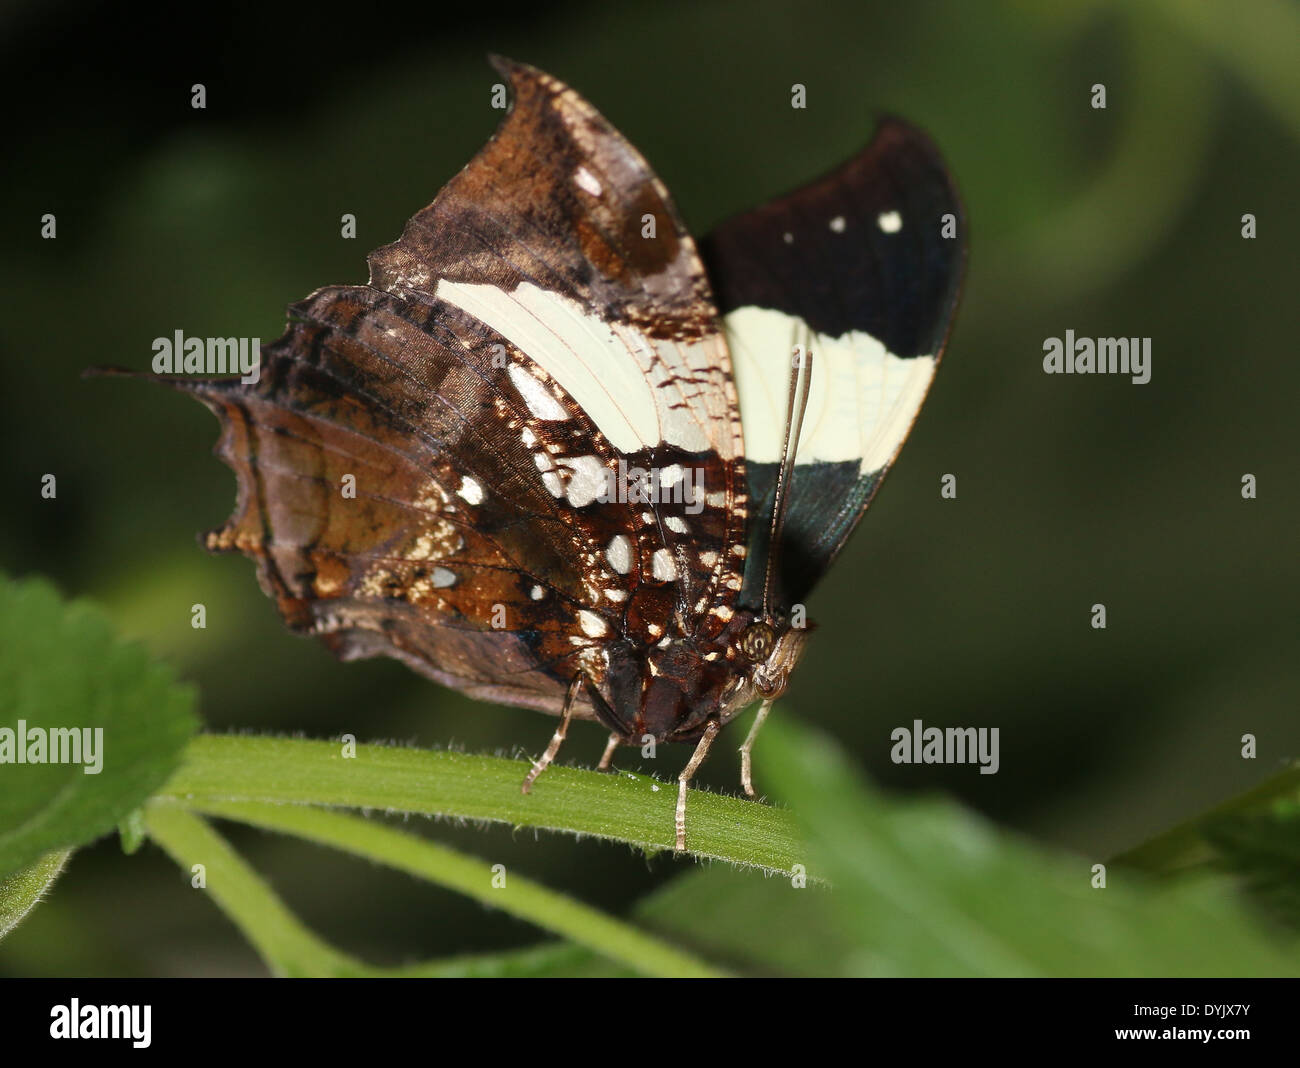 Silver-studded Leafwing Butterfly (Hypna clytemnestra) a.k.a. Jazzy Leafwing, Marbled Leafwing, wings partly opened Stock Photo